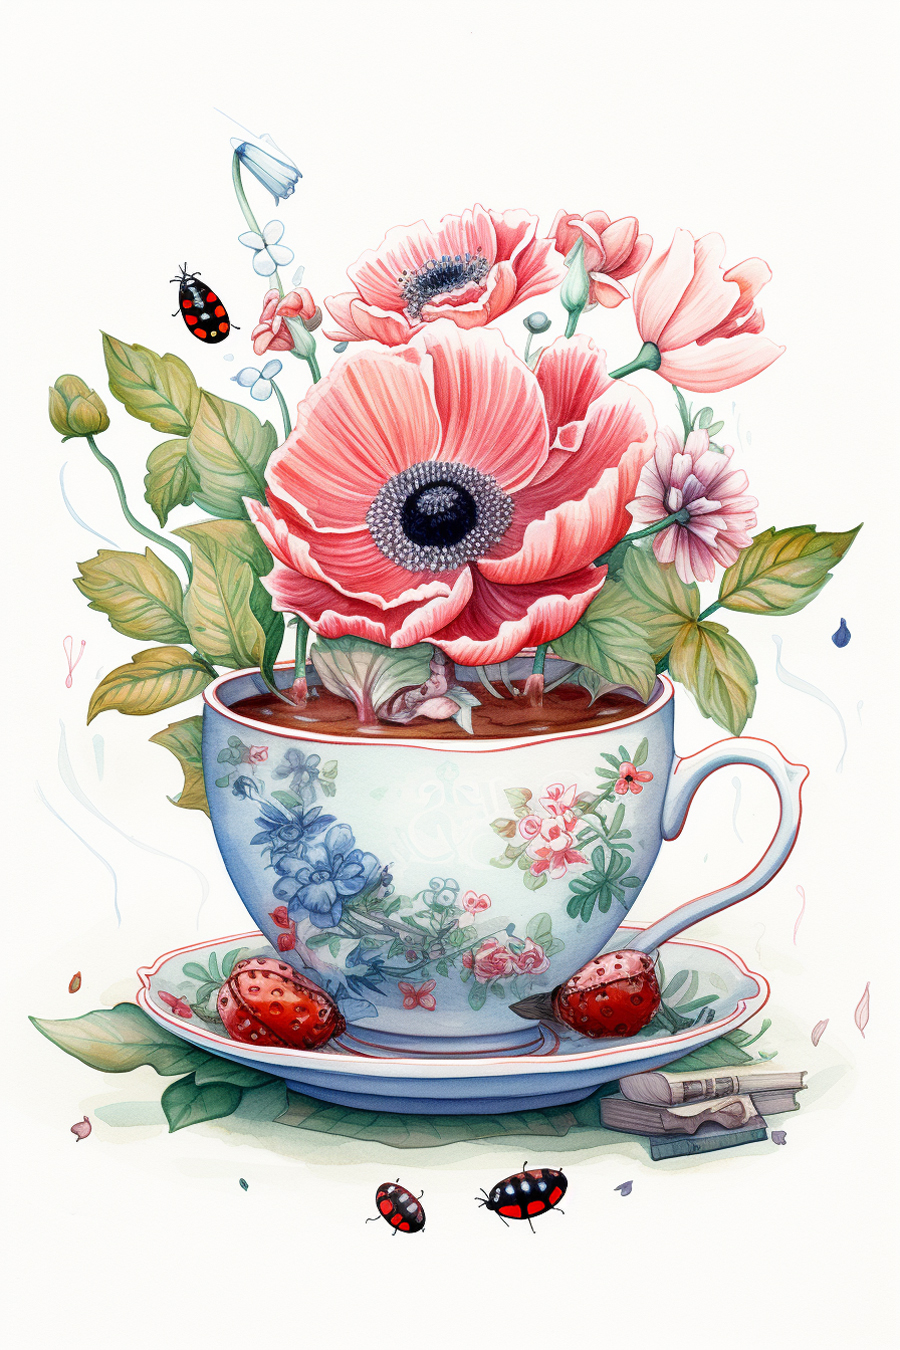 A watercolor painting of flowers in a tea cup.